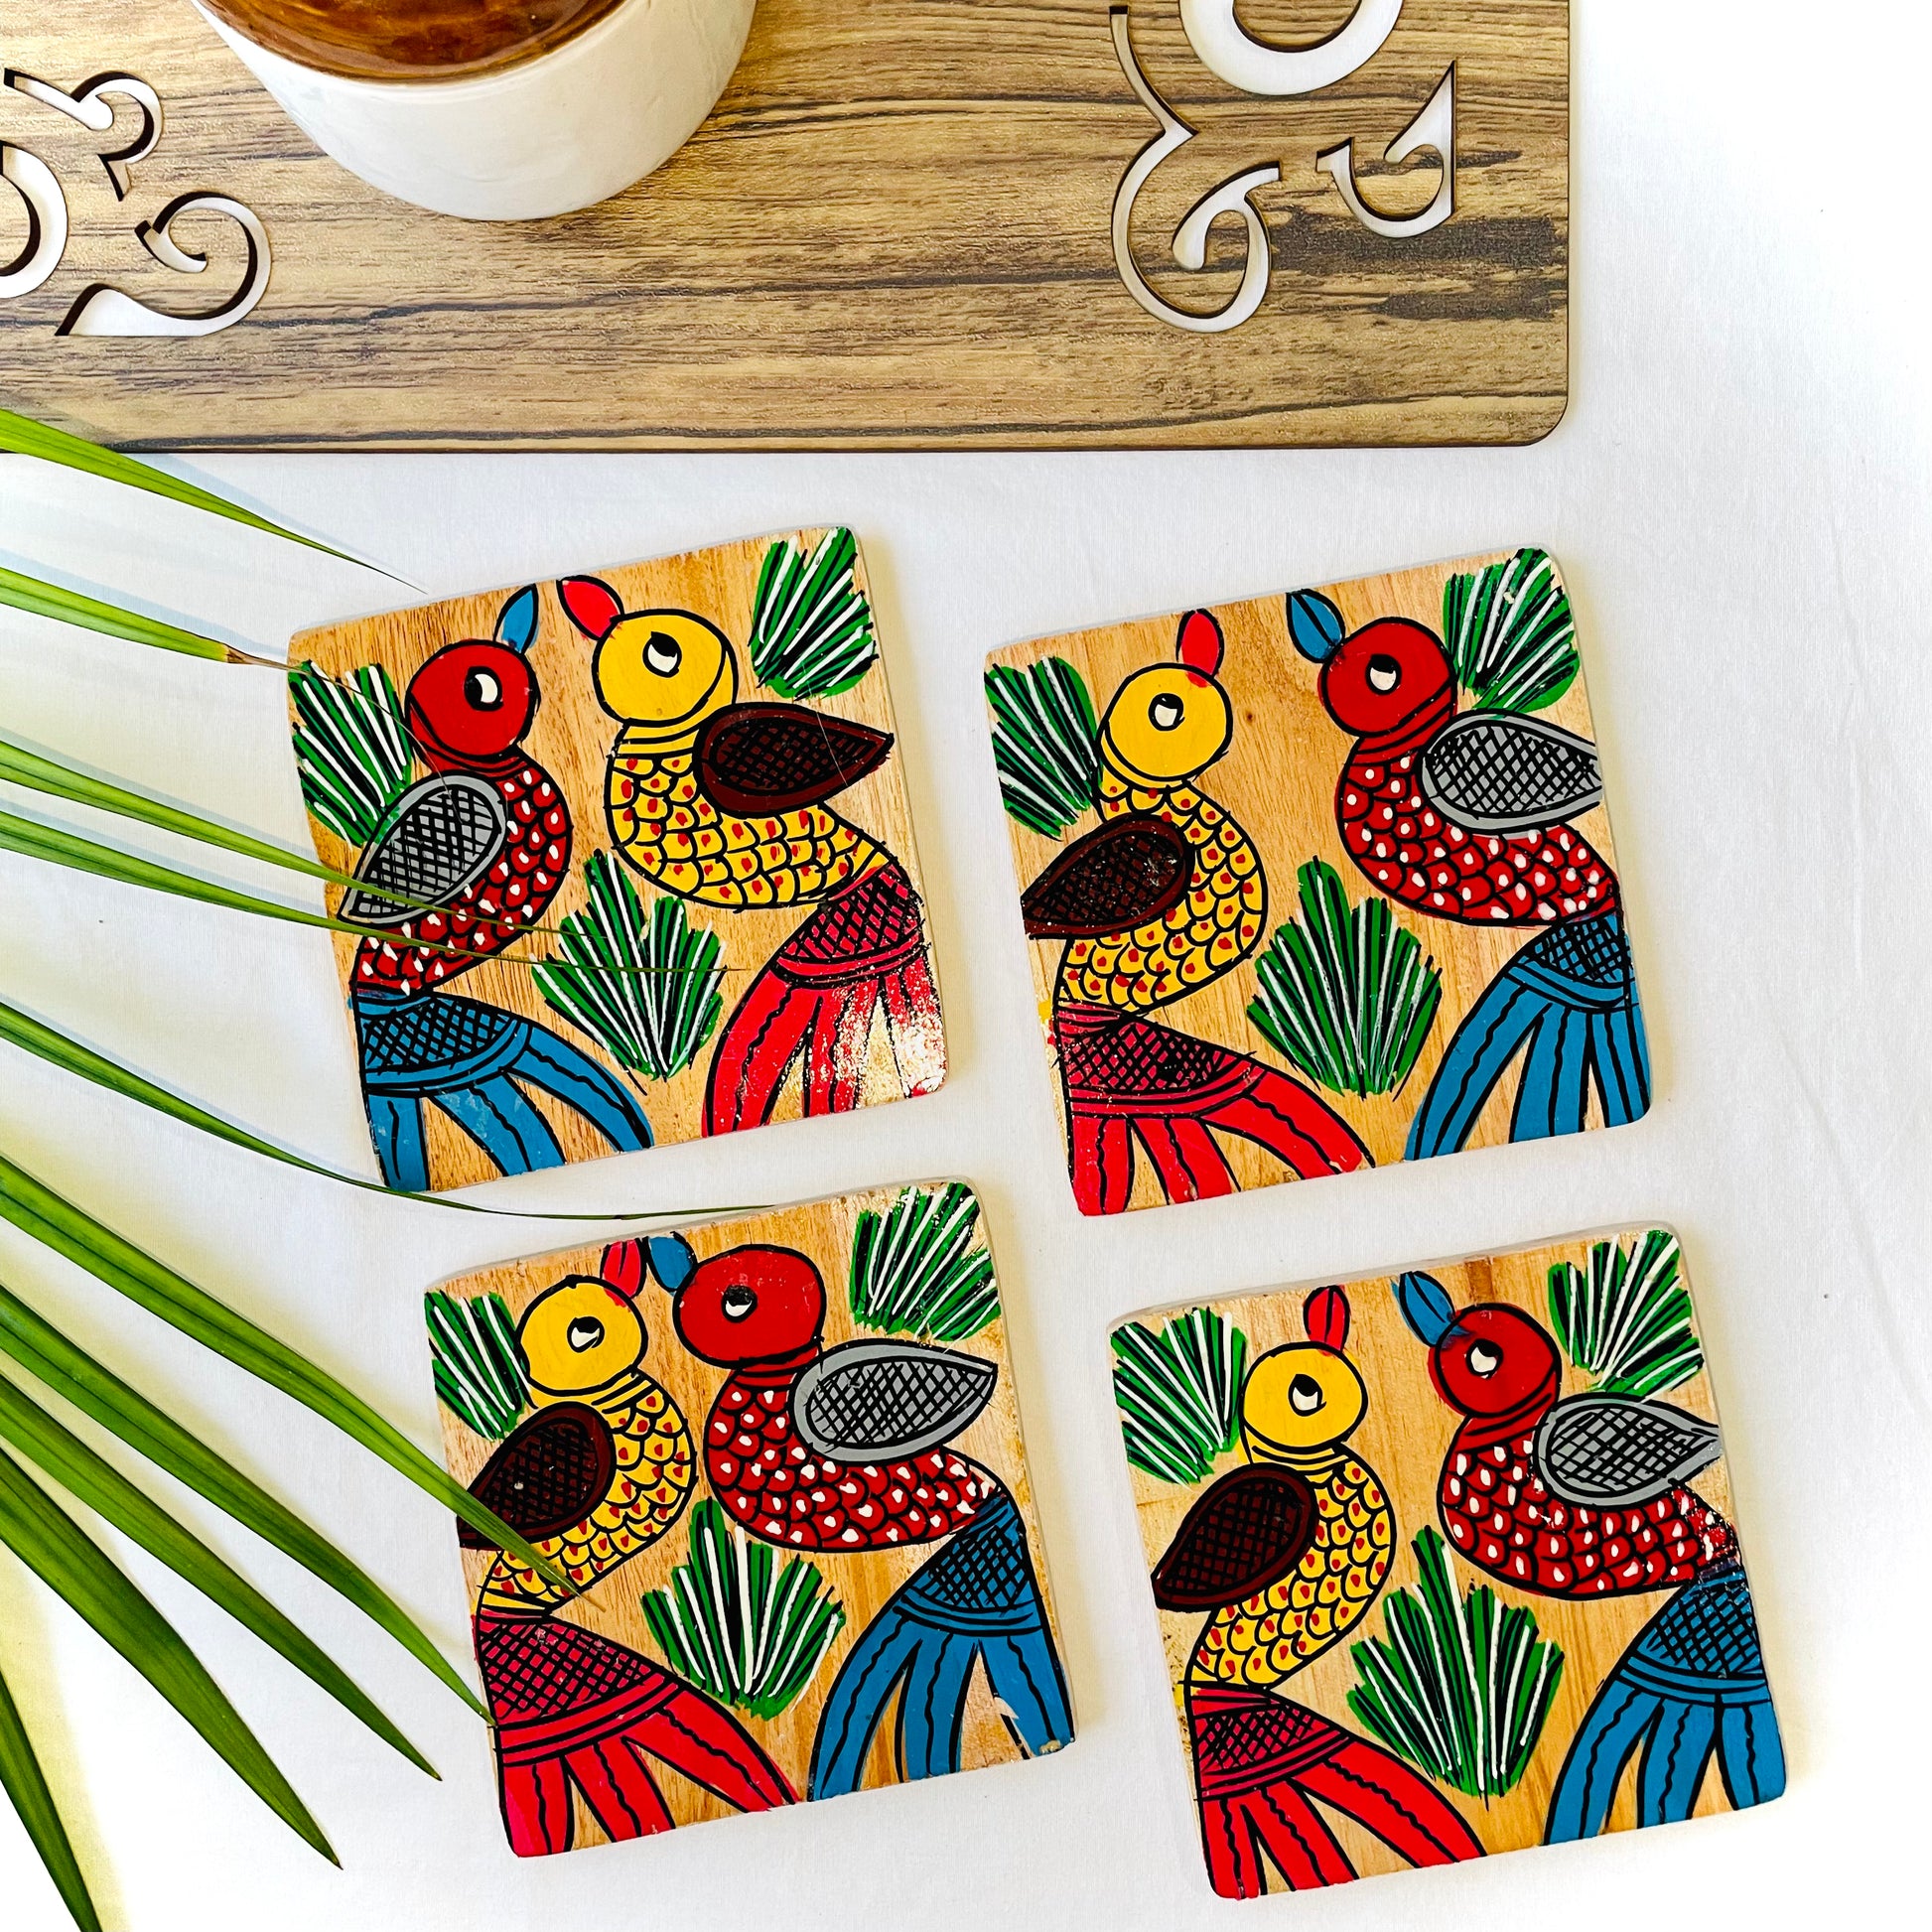 Four pure mango wood square wooden coasters, with a painting of one yellow bird with red feathers and a beak and one red with blue feathers and a beak along with some leaf in each wood coaster